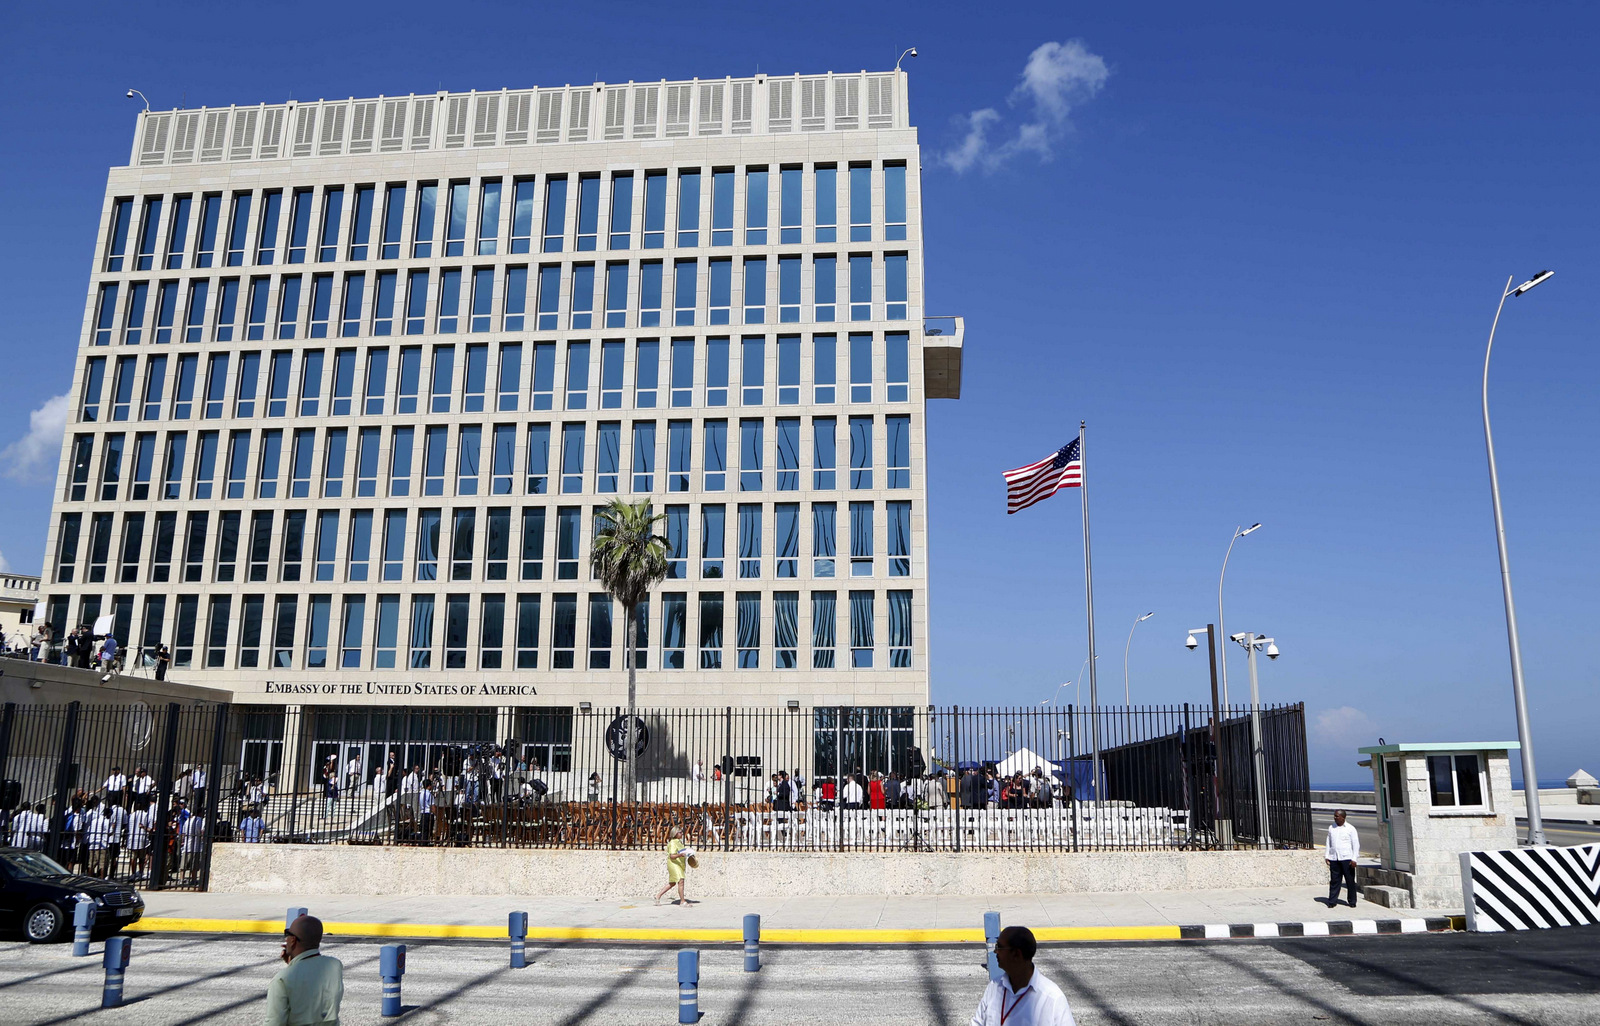 A U.S. flag flies at the U.S. embassy in Havana, Cuba. U.S. investigators are chasing many theories about what’s harming American diplomats in Cuba, including a sonic attack, electromagnetic weapon or flawed spying device. (AP/Desmond Boylan)